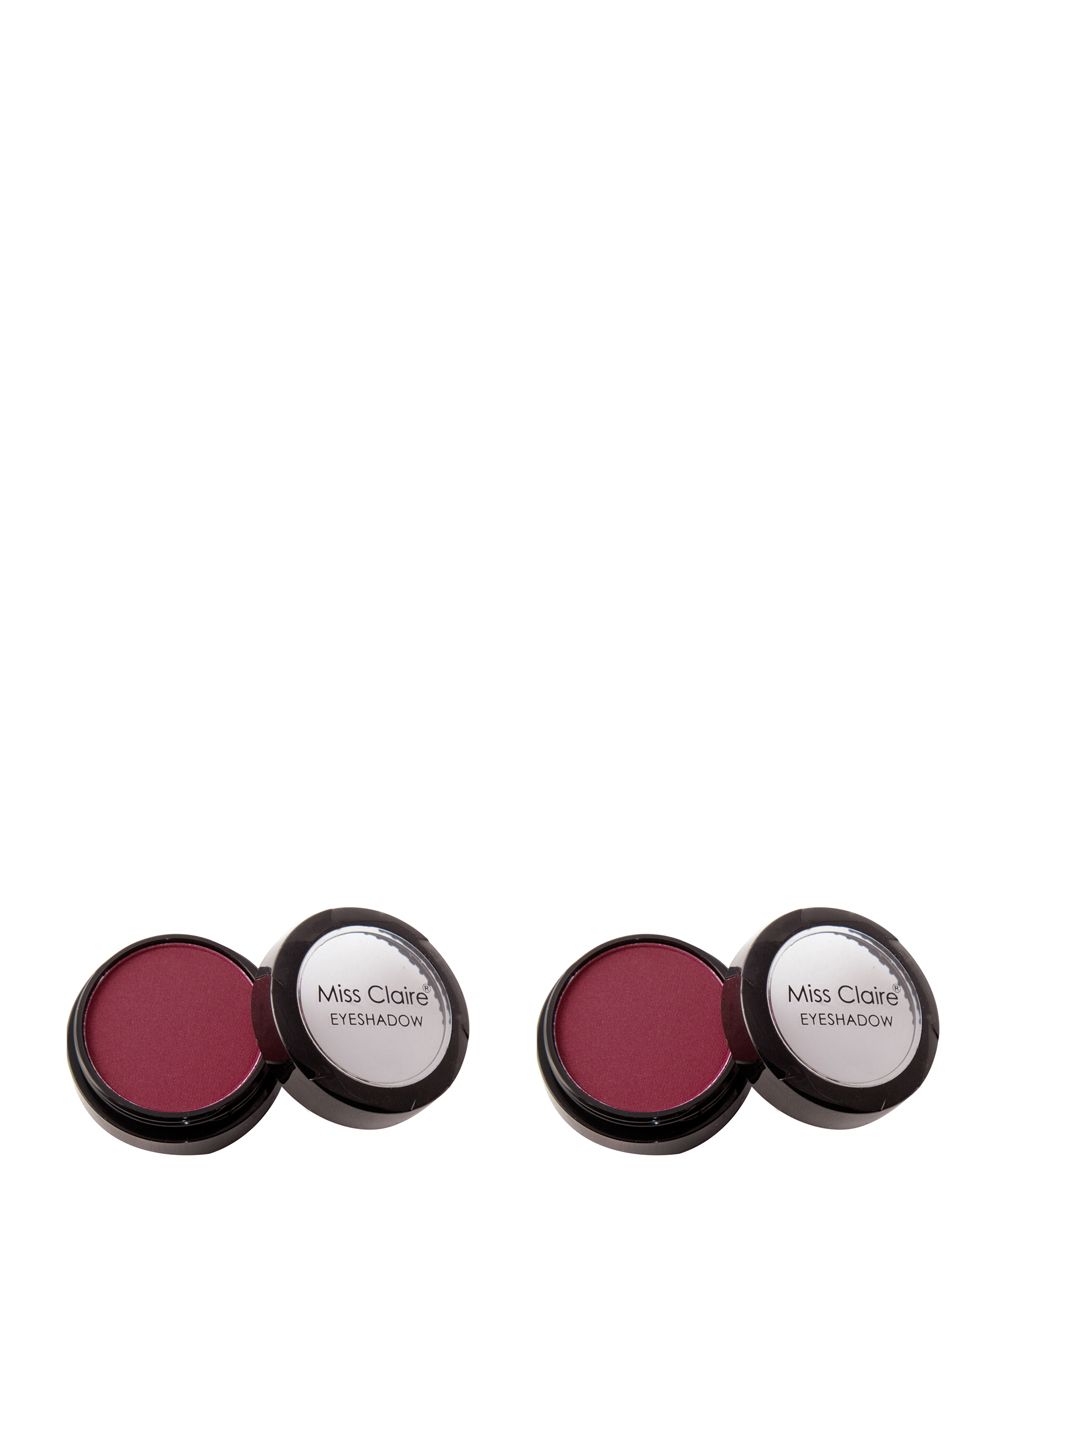 Miss Claire Set of 0502 & 0508 Single Eyeshadows Price in India